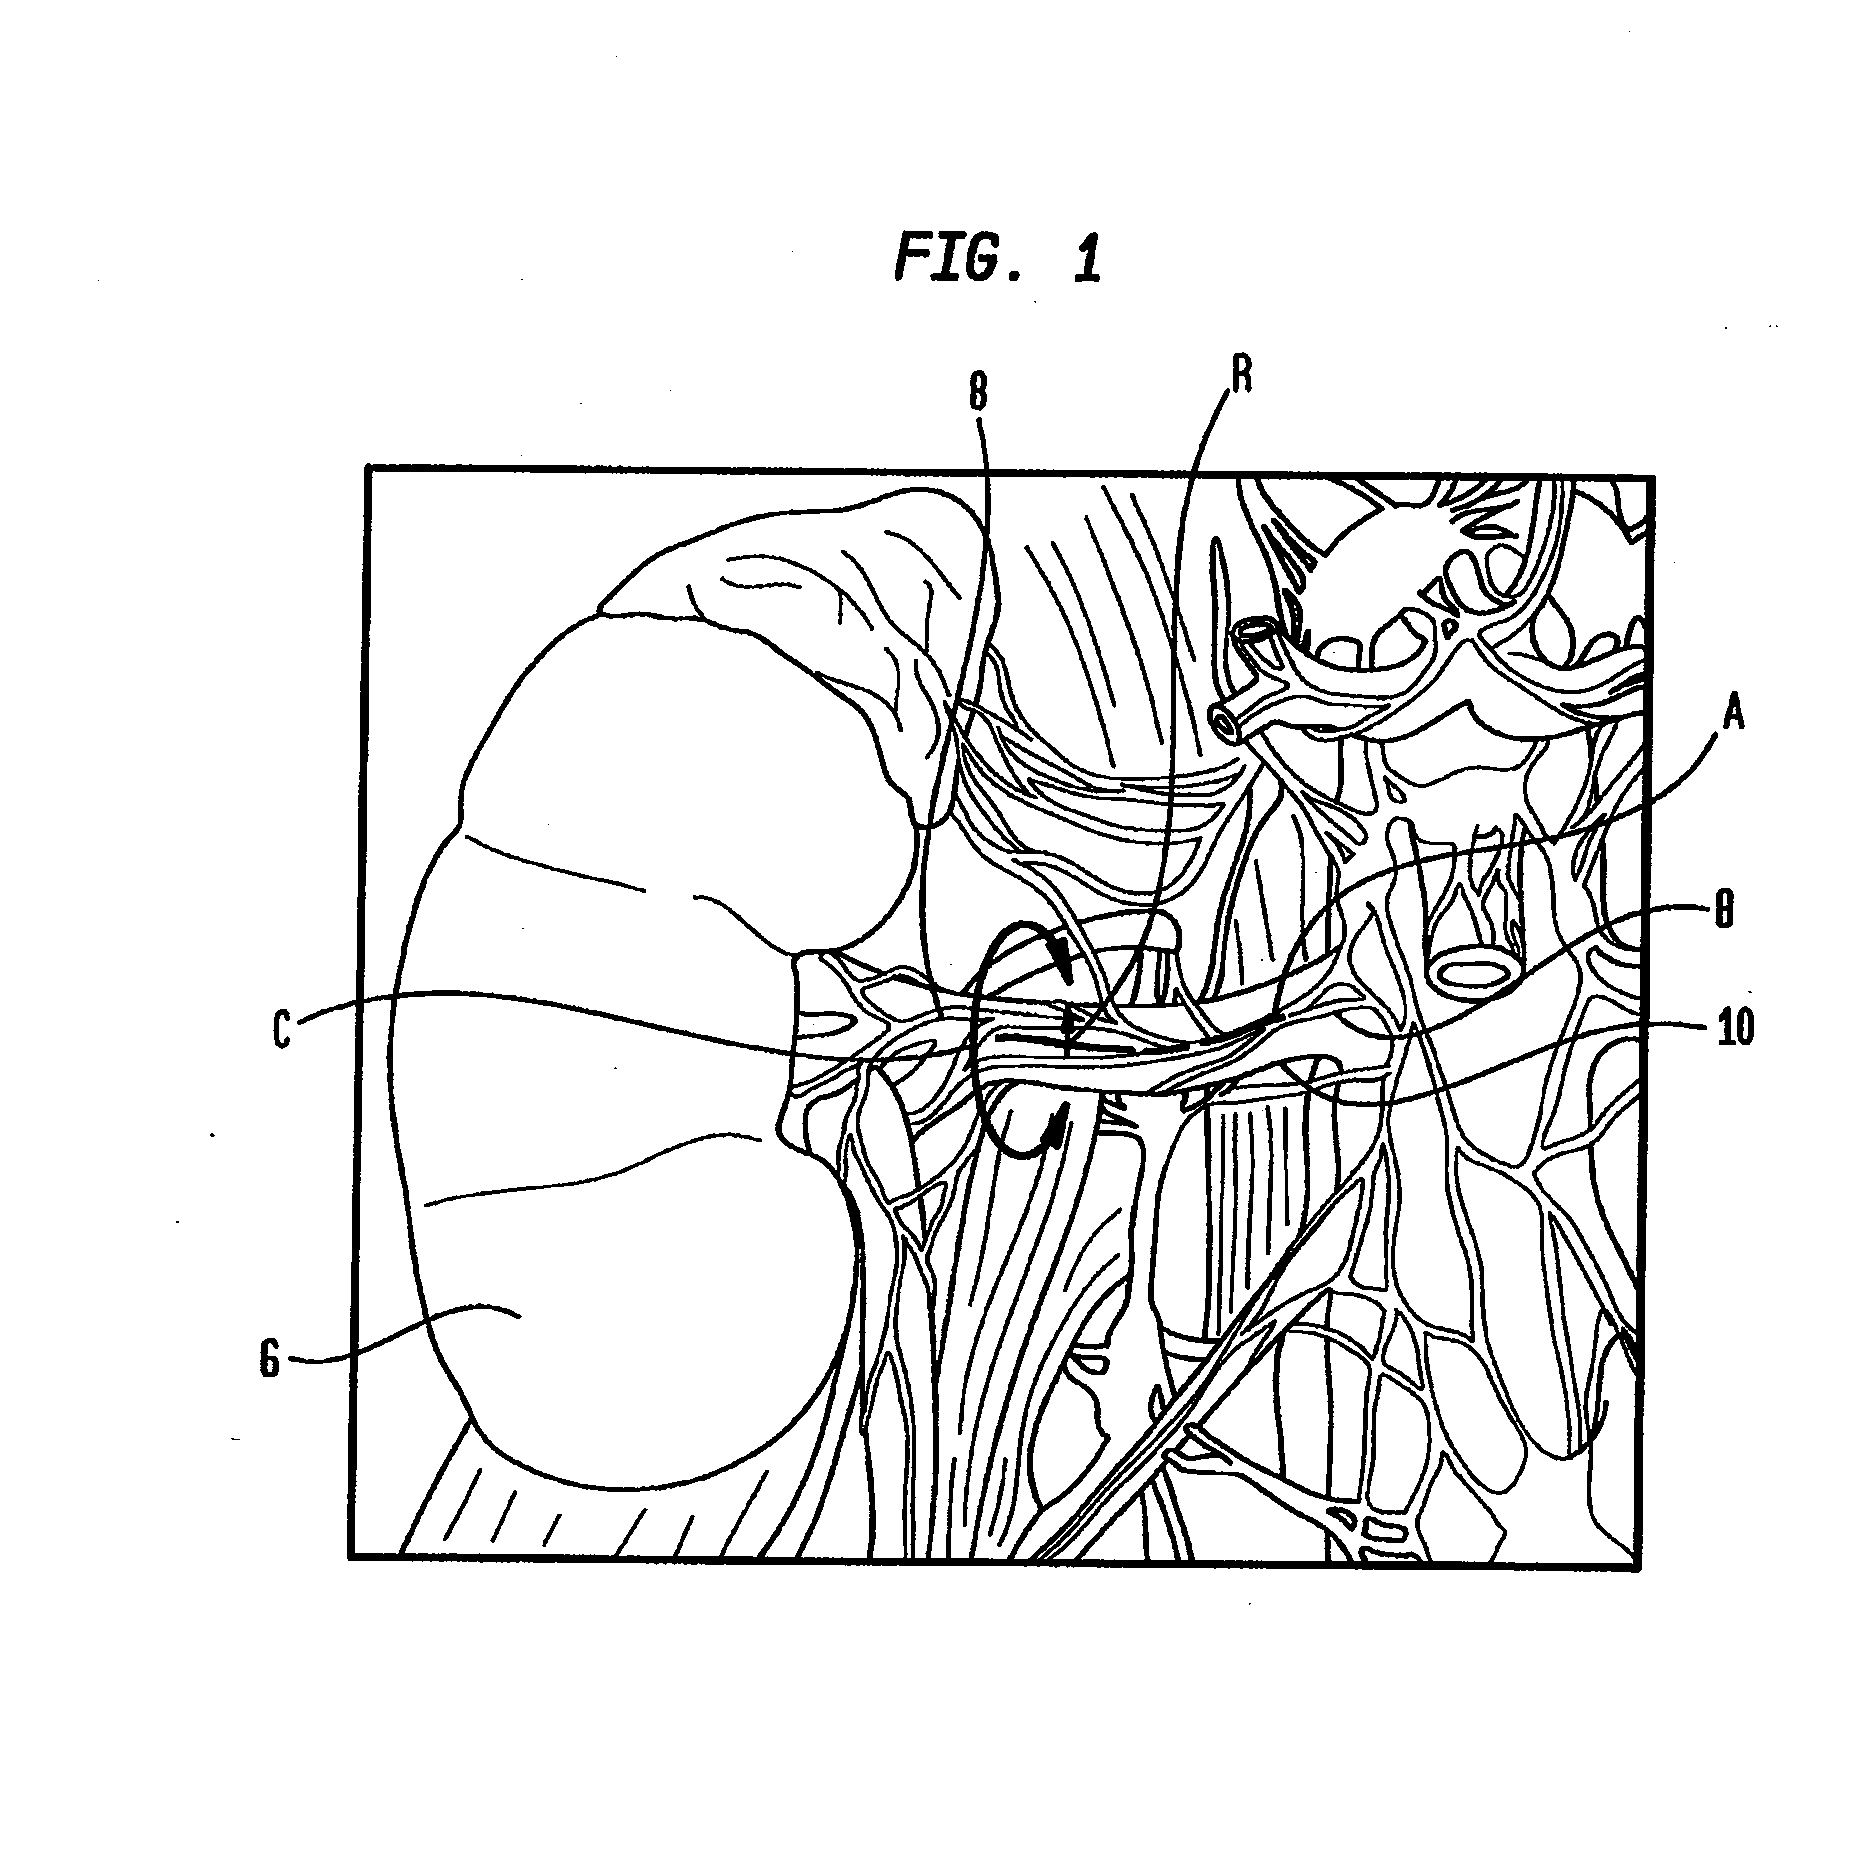 Method and Apparatus for Treatment of Hypertension Through Percutaneous Ultrasound Renal Denervation